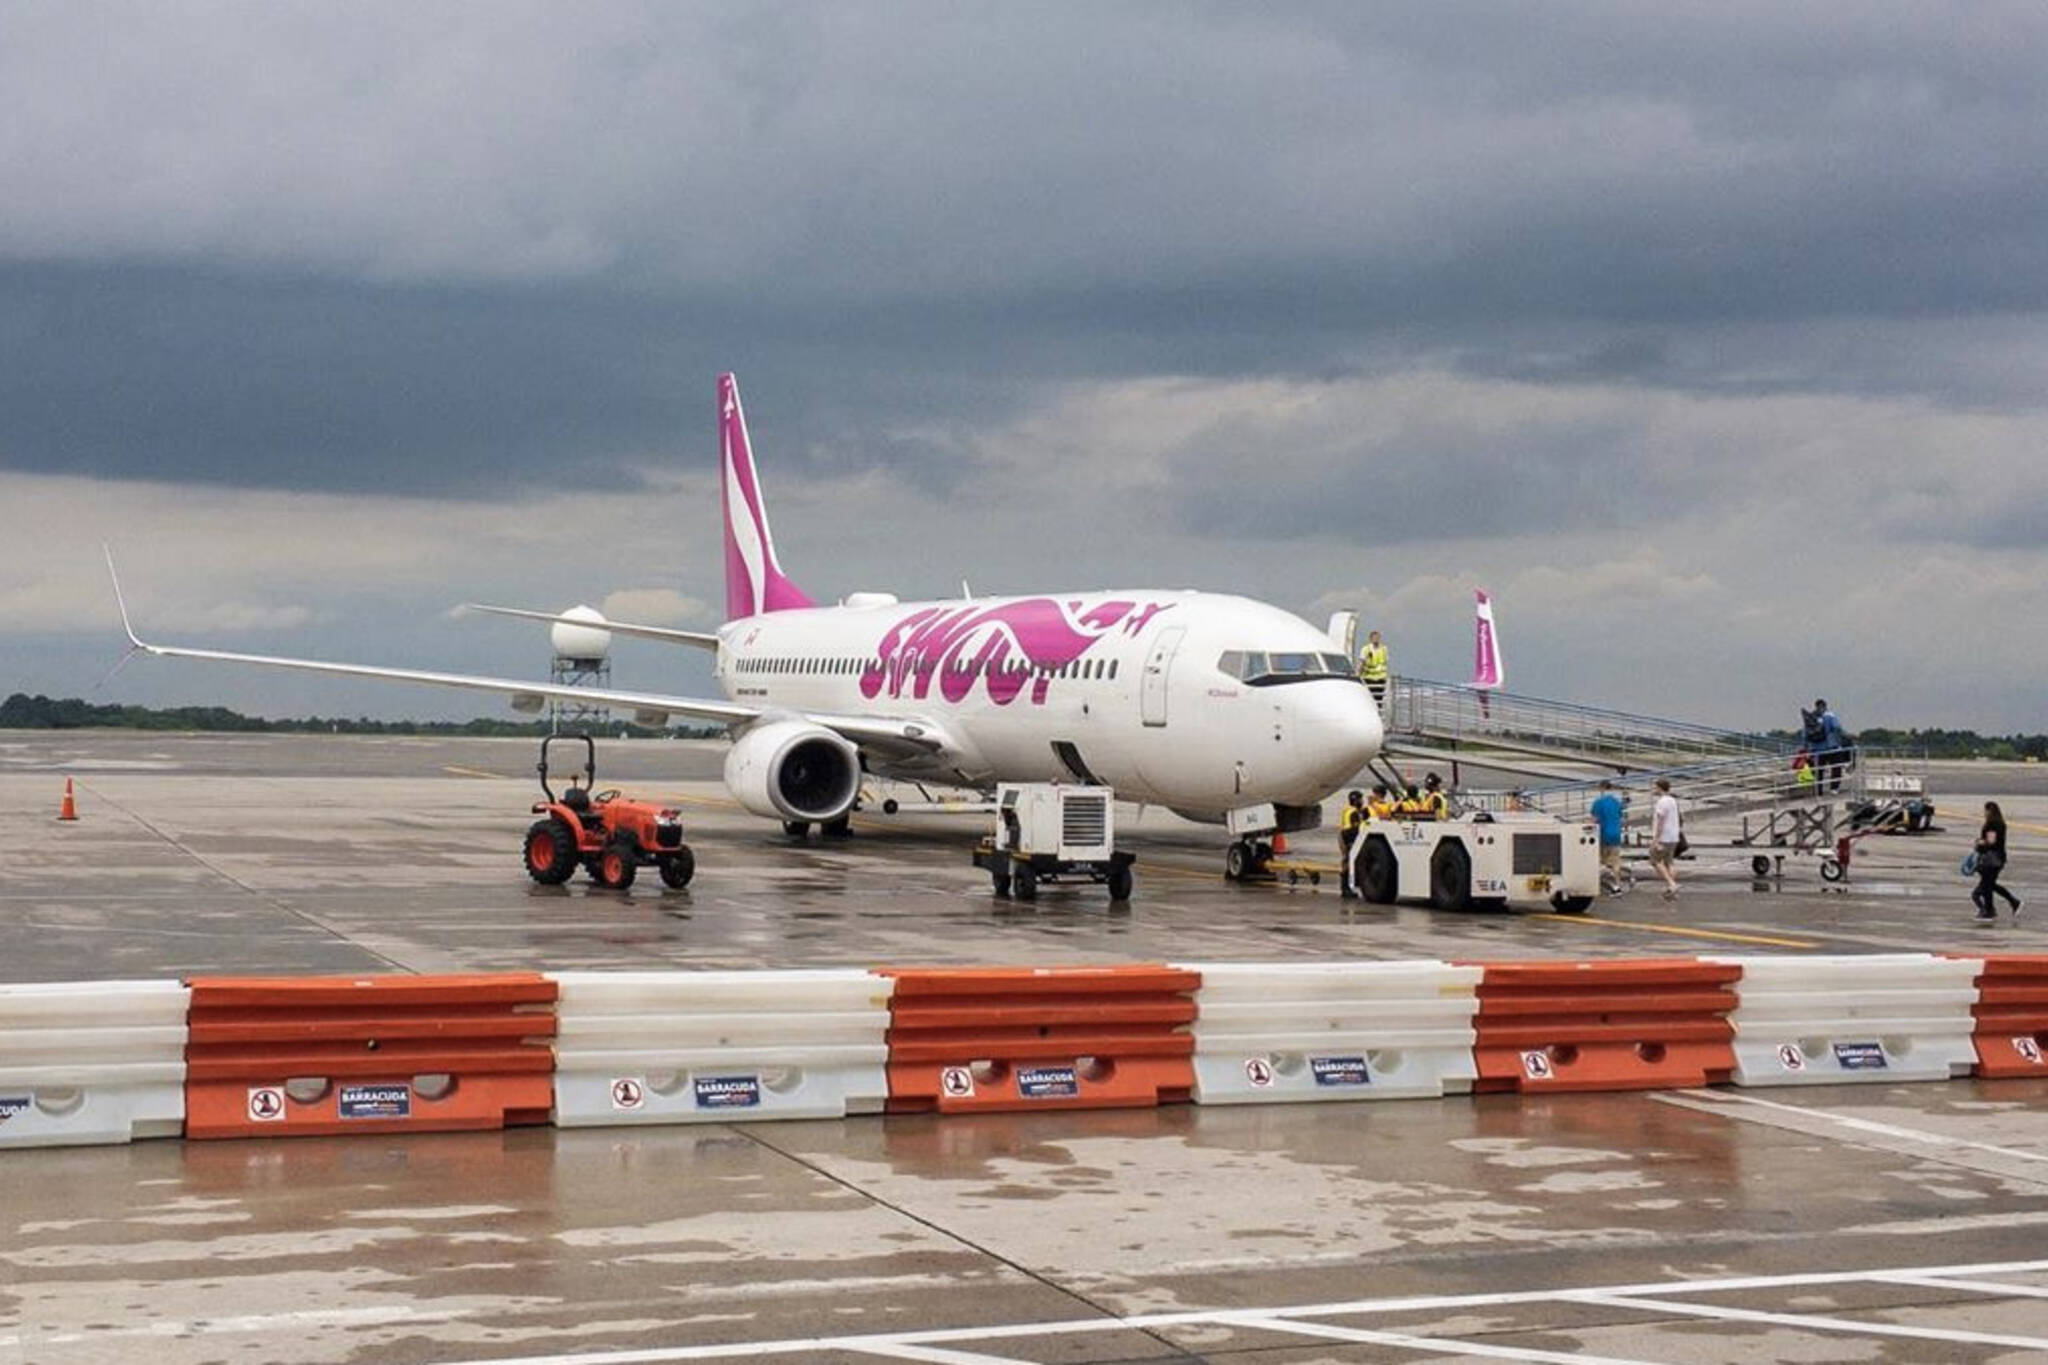 swoop airline cancellation